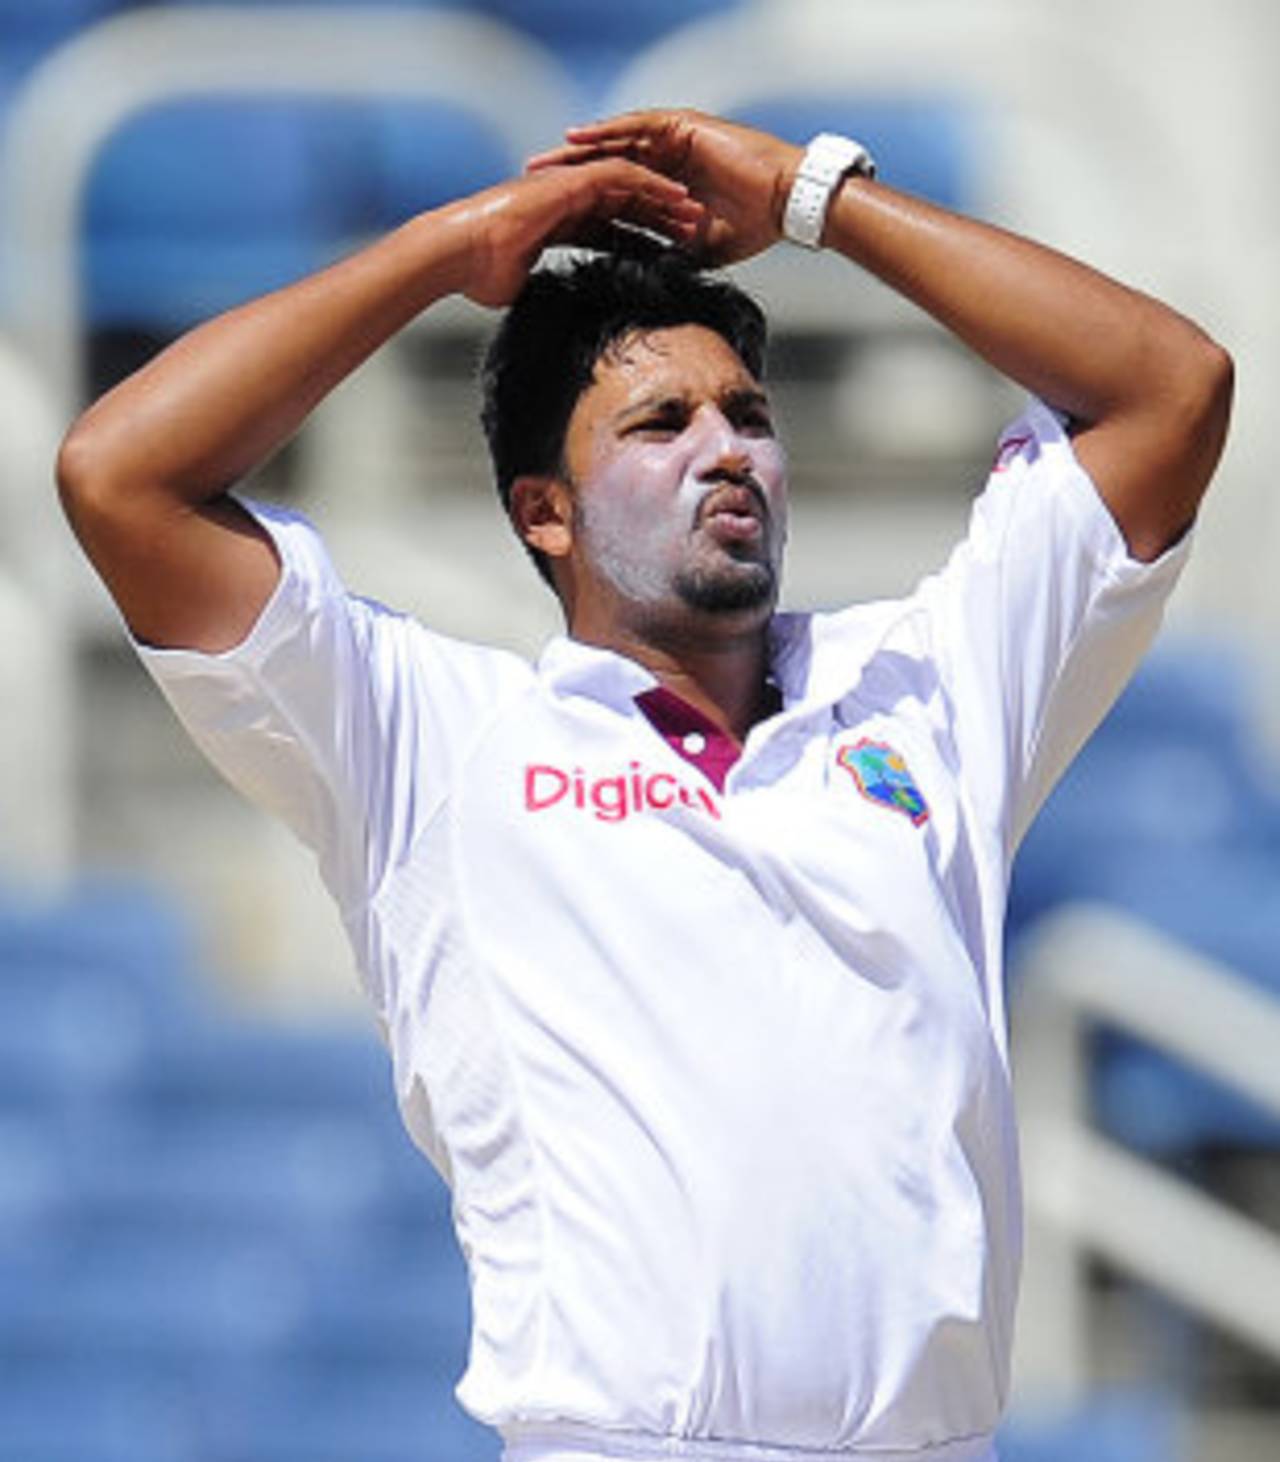 Ravi Rampaul reacts after the batsman survives a close chance, West Indies v India, 1st Test, Kingston, 3rd day, June 22, 2011